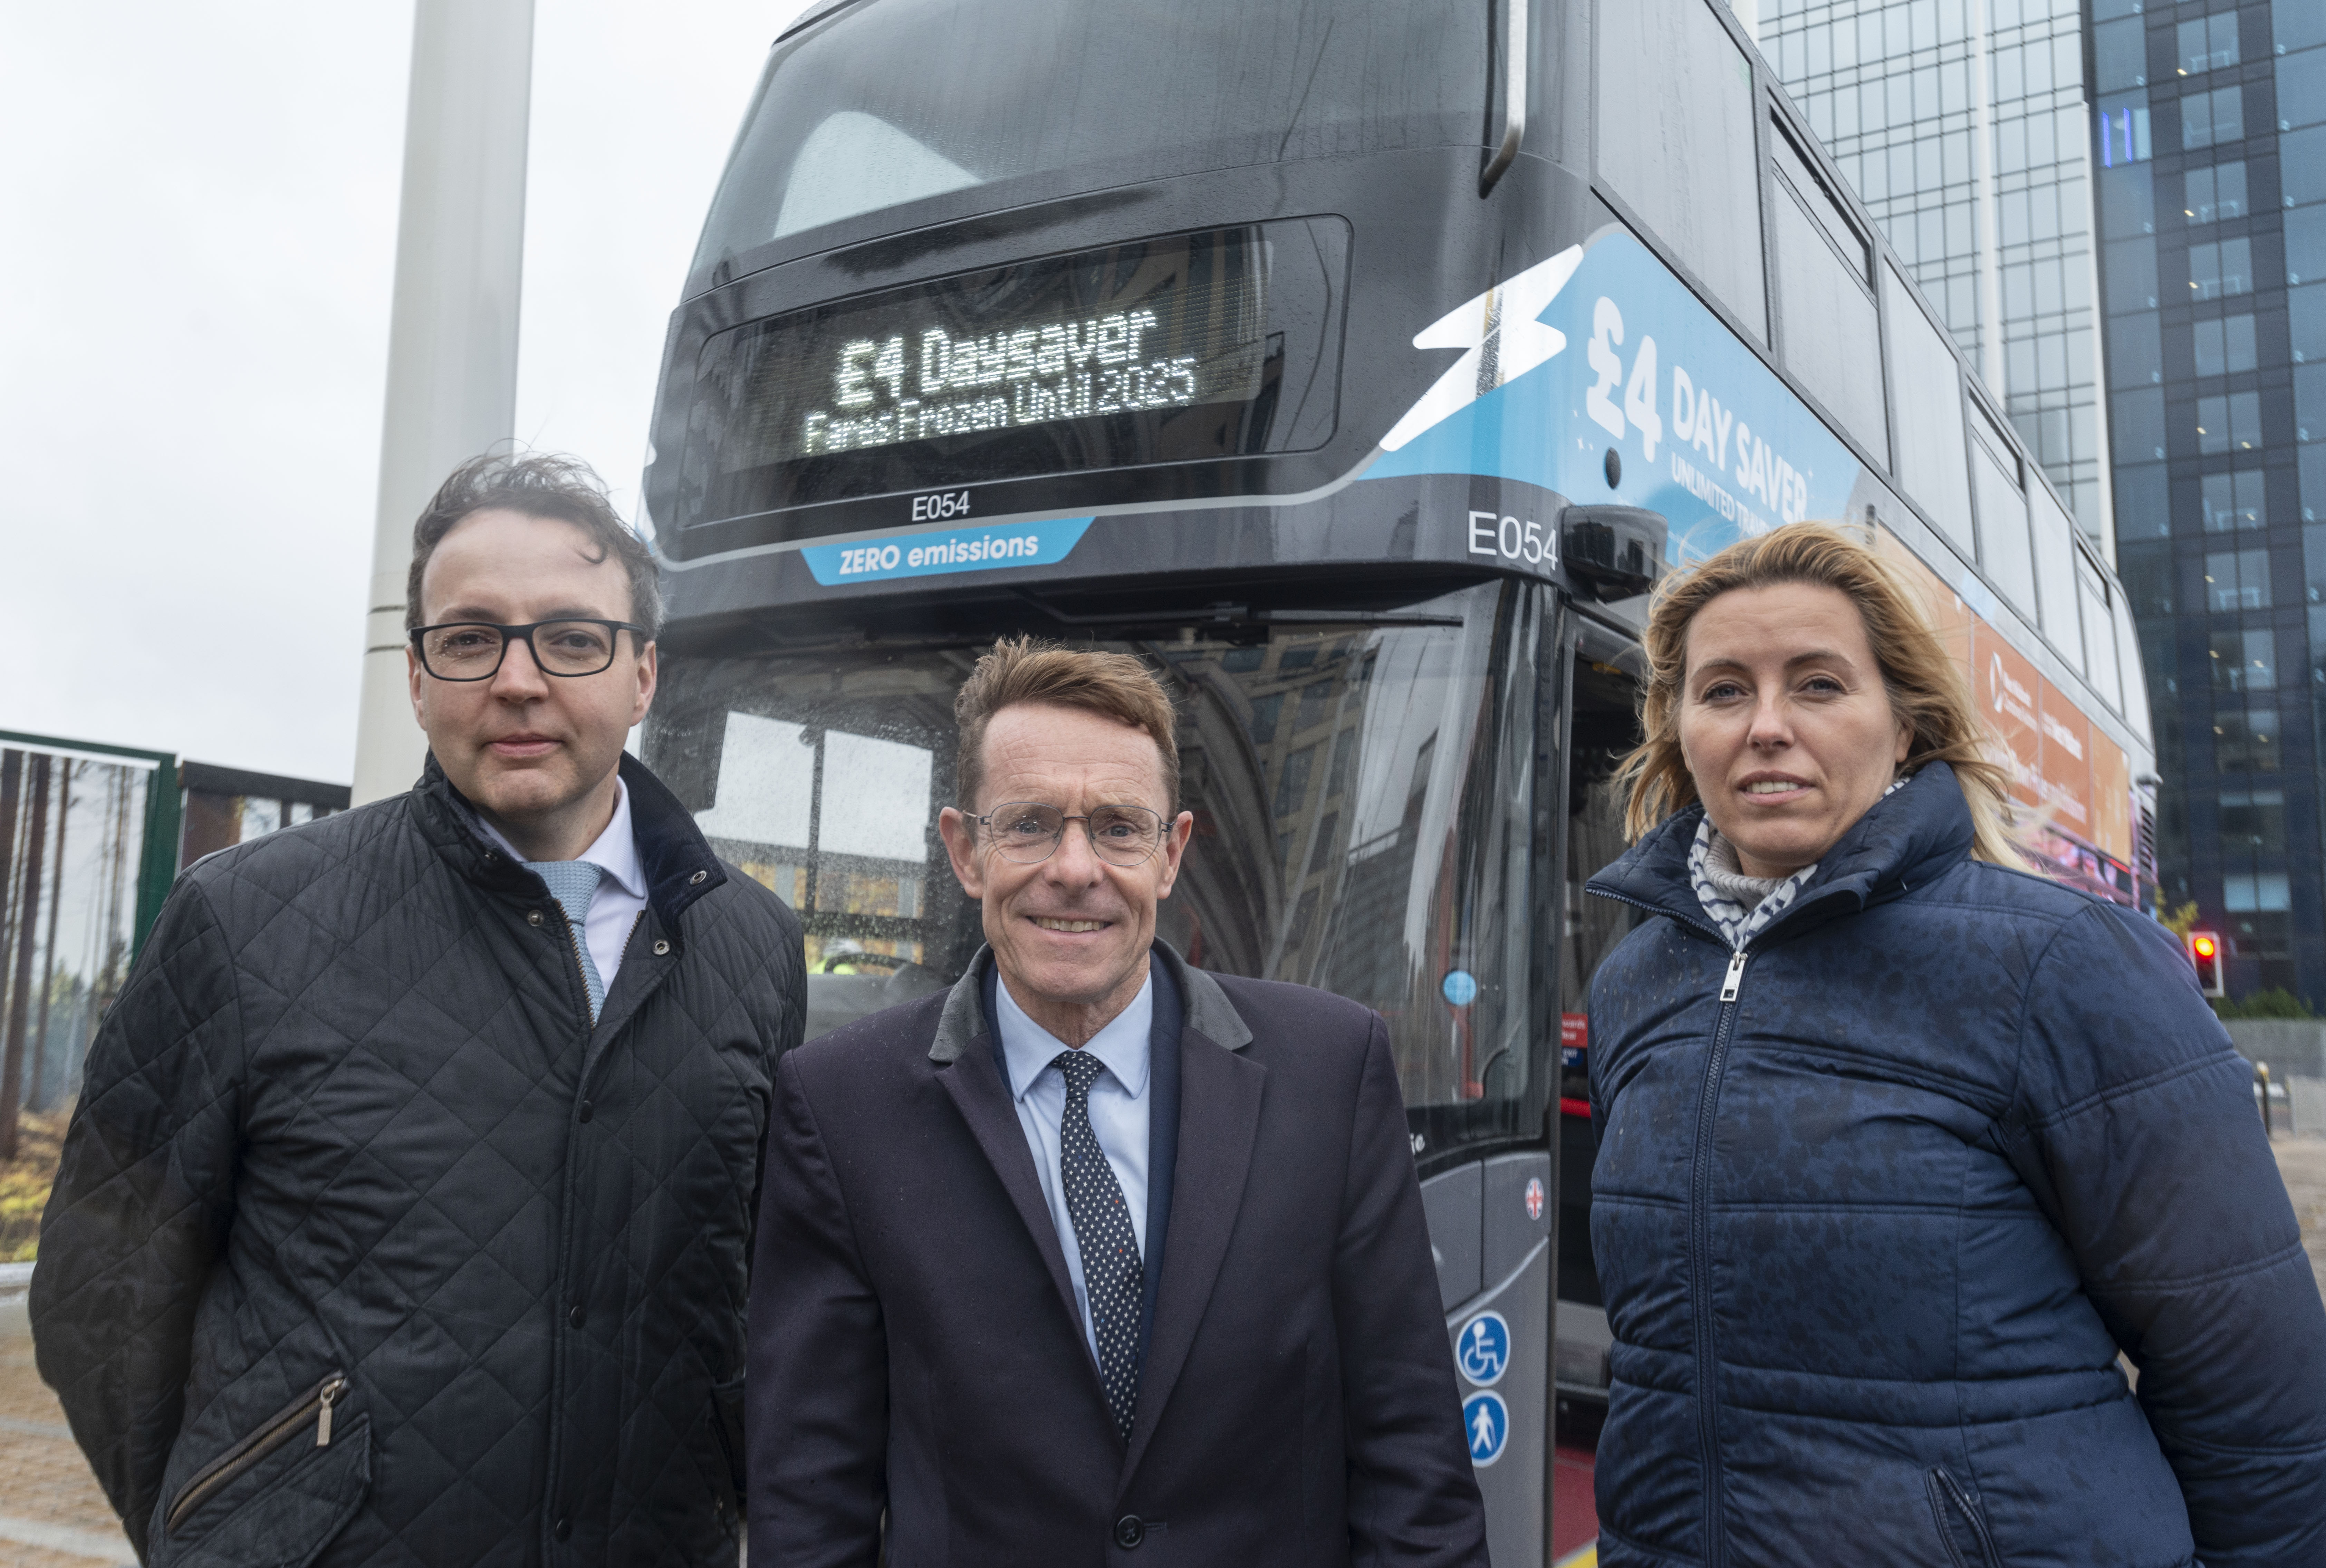 David Bradford, managing director National Express West Midlands, Mayor of the West Midlands Andy Street and Agata Litwinowicz-Soltysiak, zero emission operational manager with National Express in front of a new electric bus